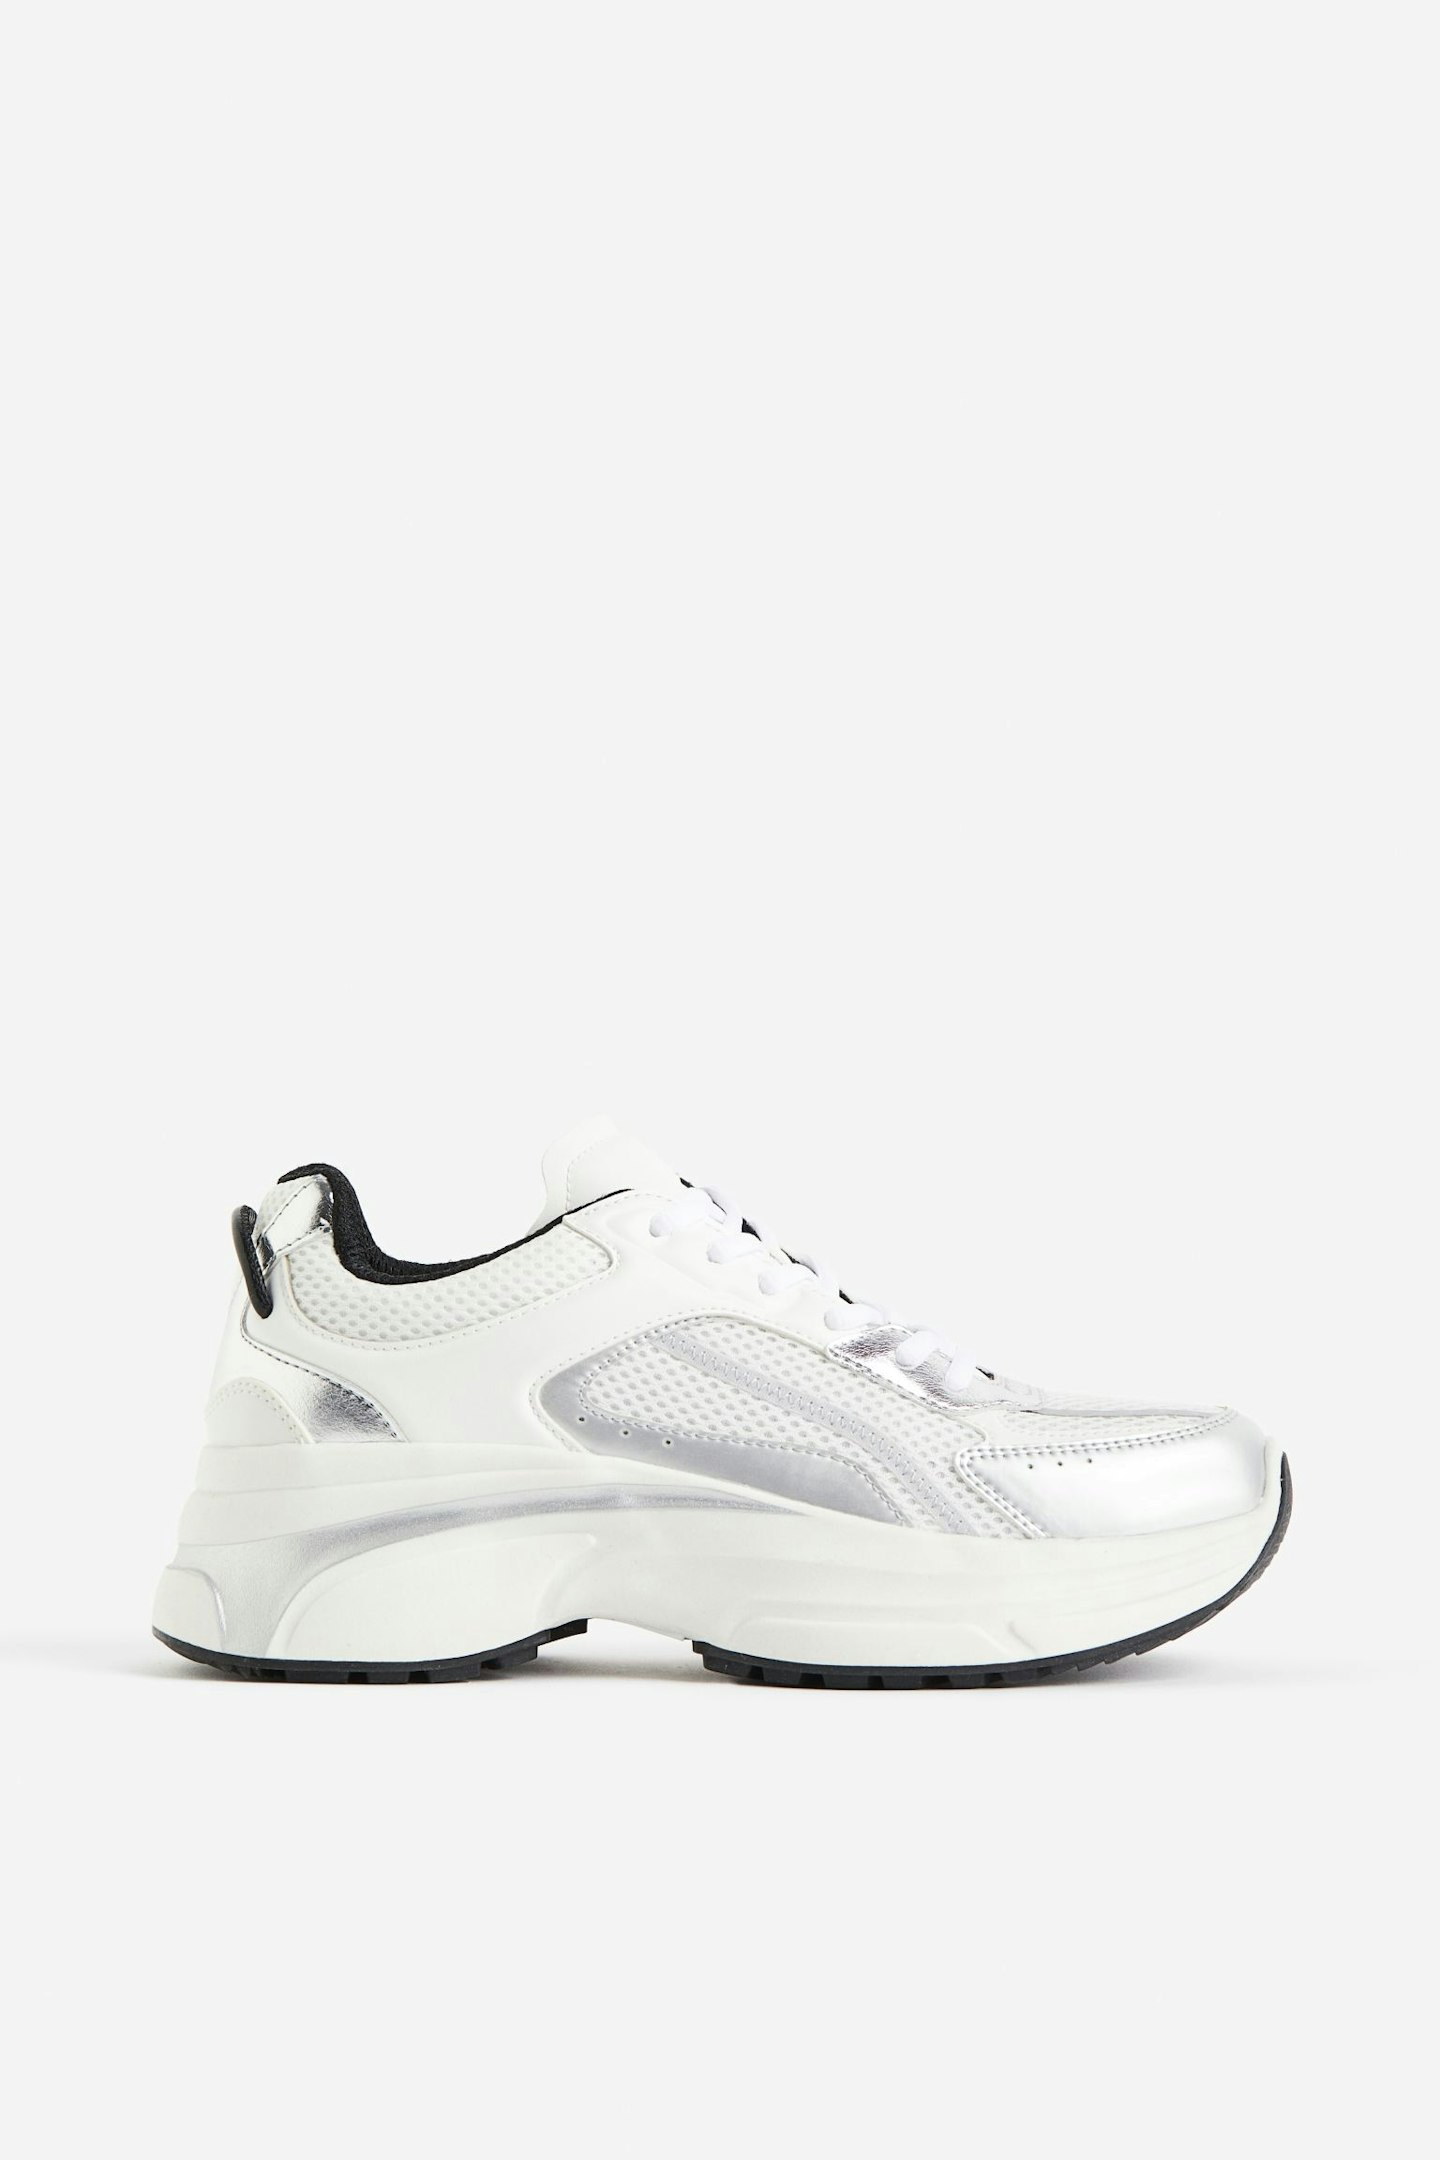 H&M Chunky Trainers